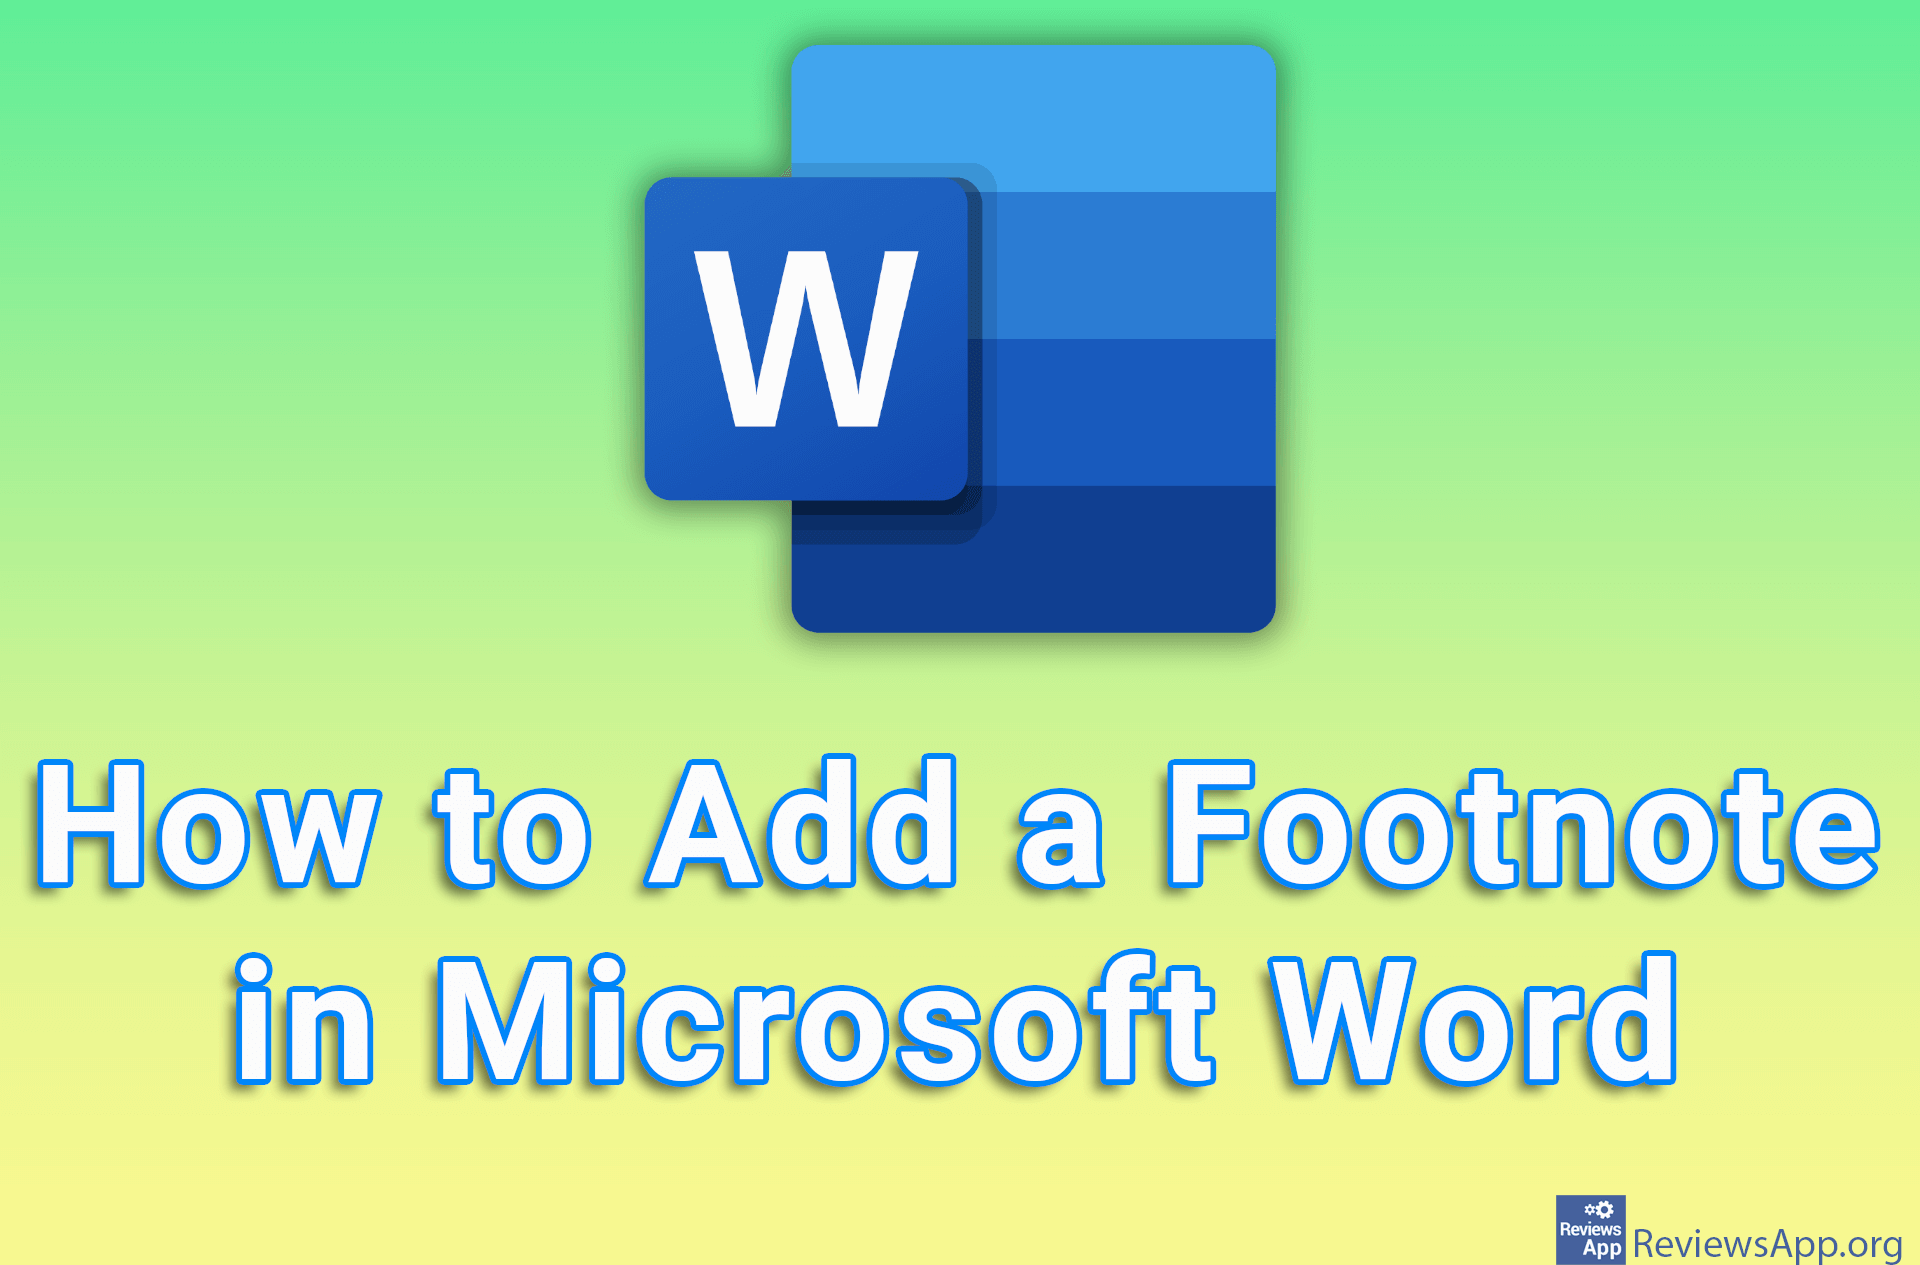 How to Add a Footnote in Microsoft Word